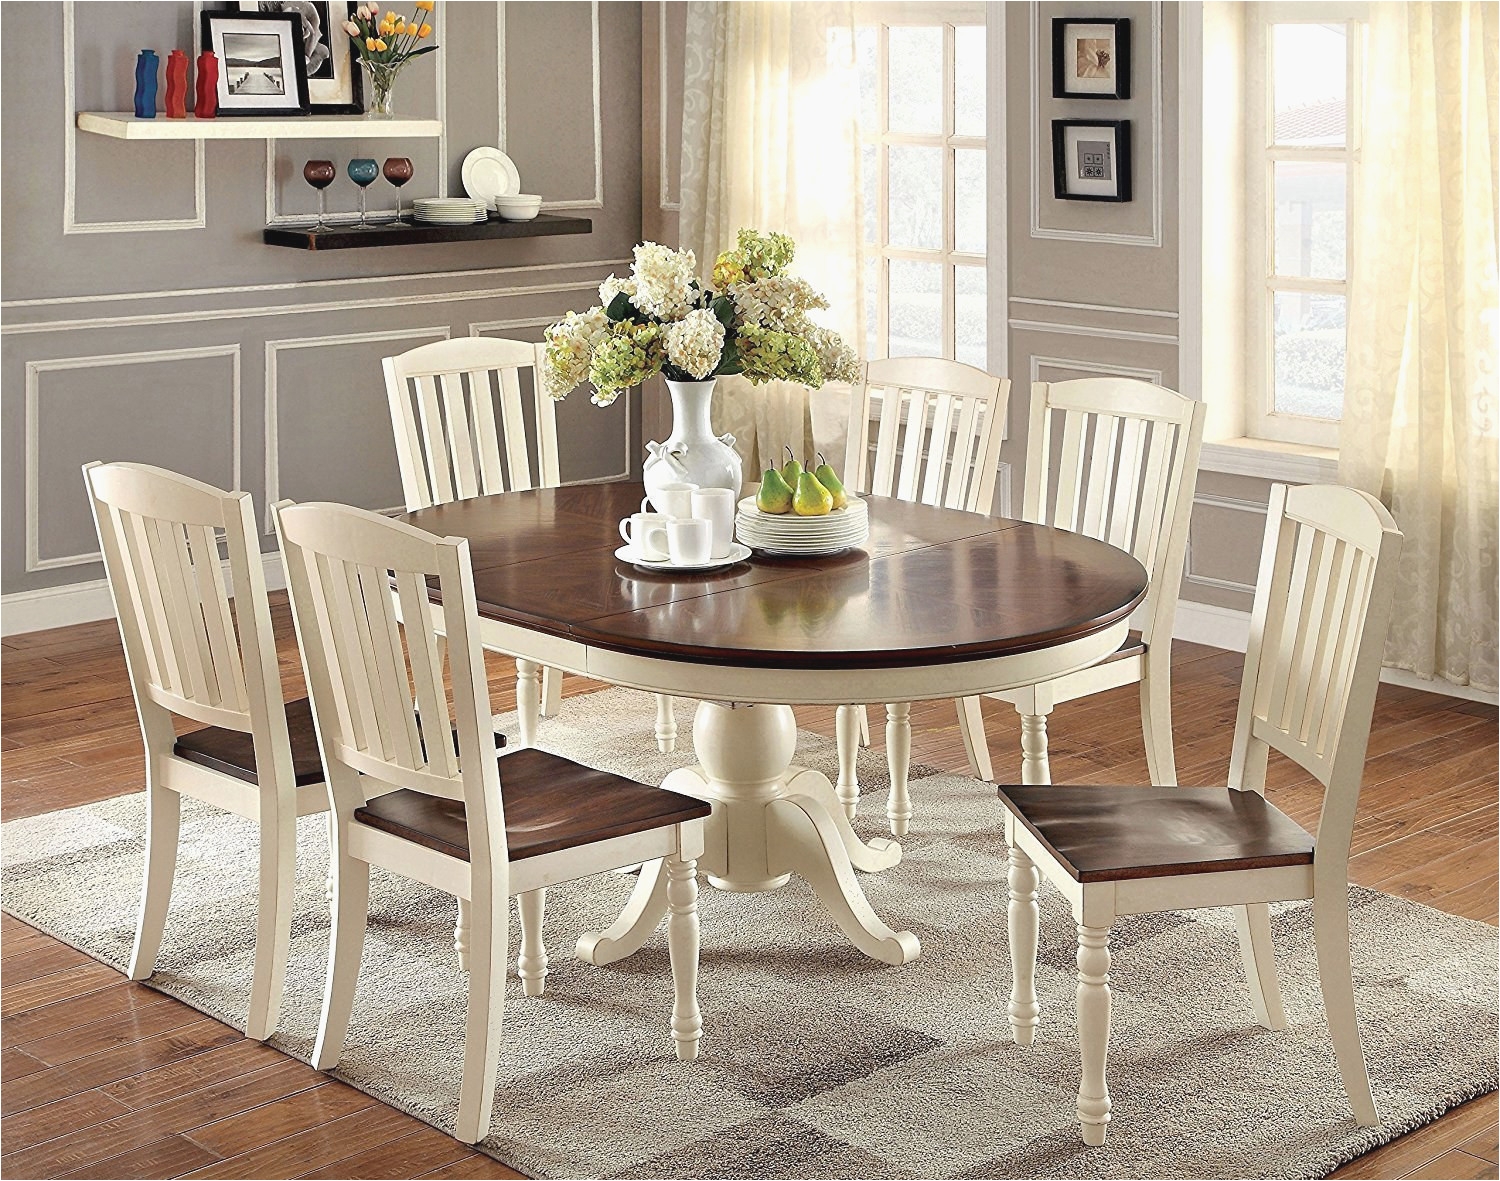 Chandelier for Dining Room Table Lovely 6 Dining Room Chairs Best Houzz Lighting Fixtures Lighting 0d